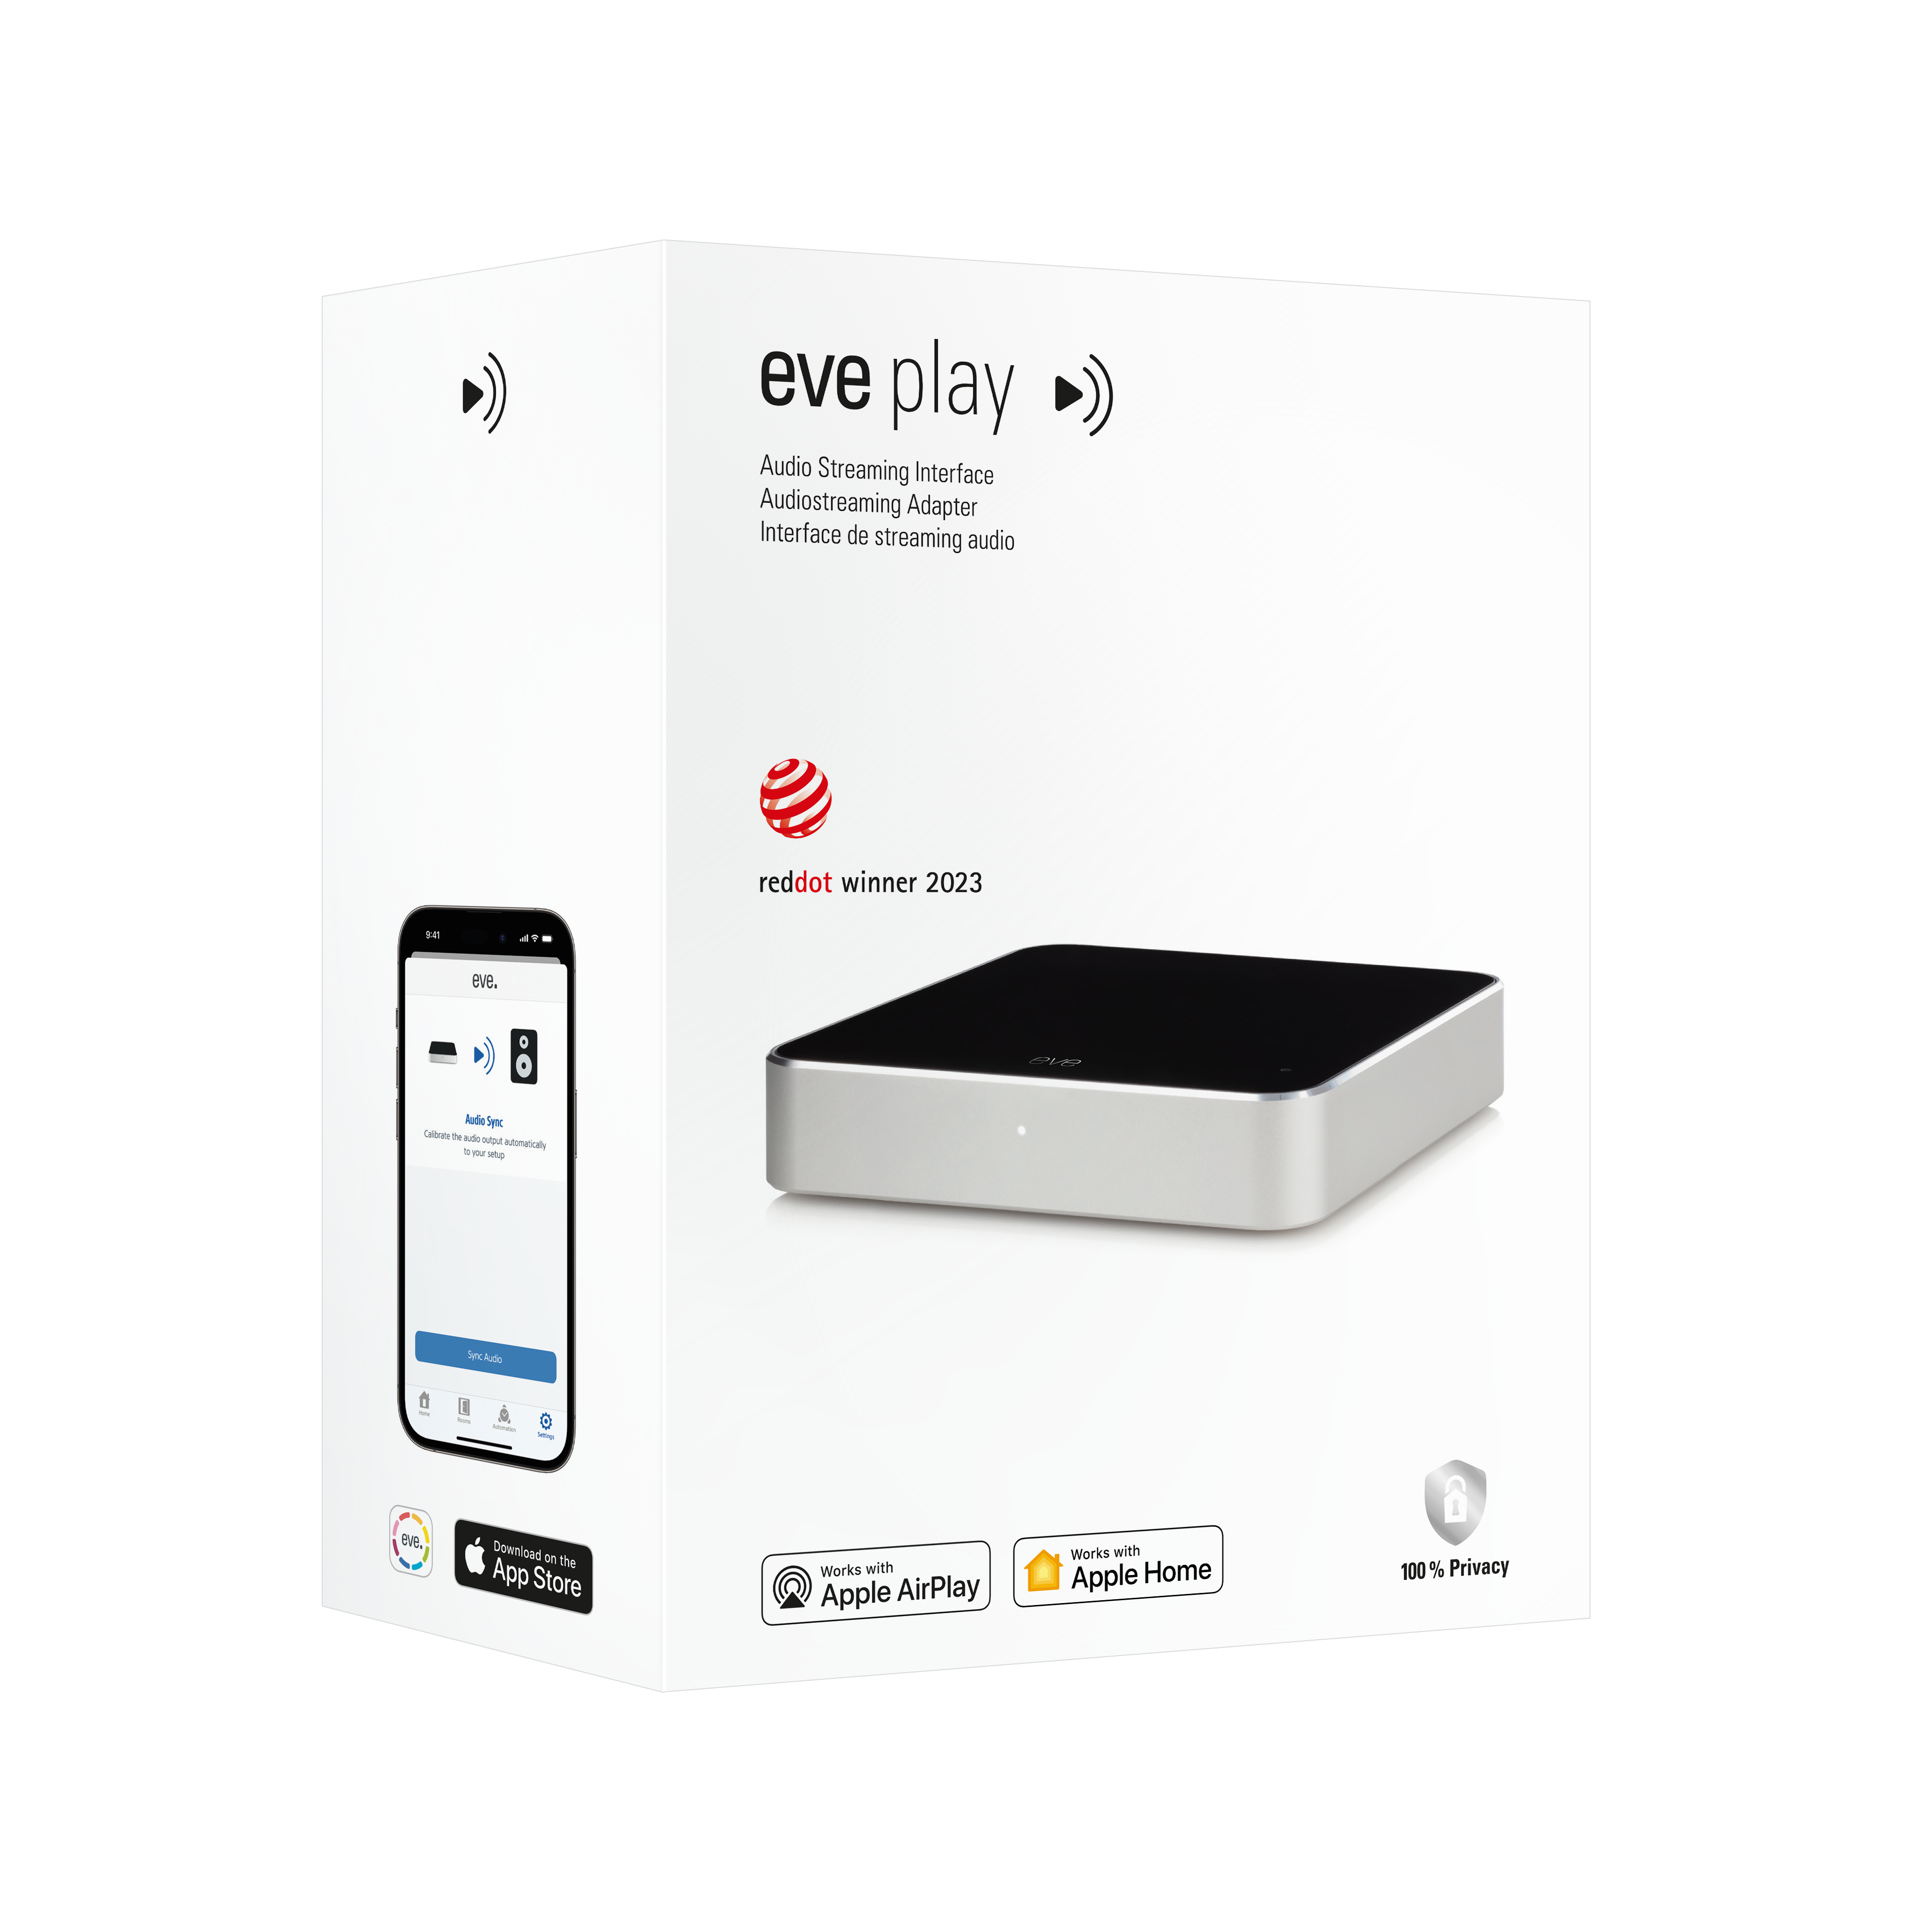 Eve Play - Audiostreaming Musikstreaming HiFi Adapter für AirPlay ++  Cyberport